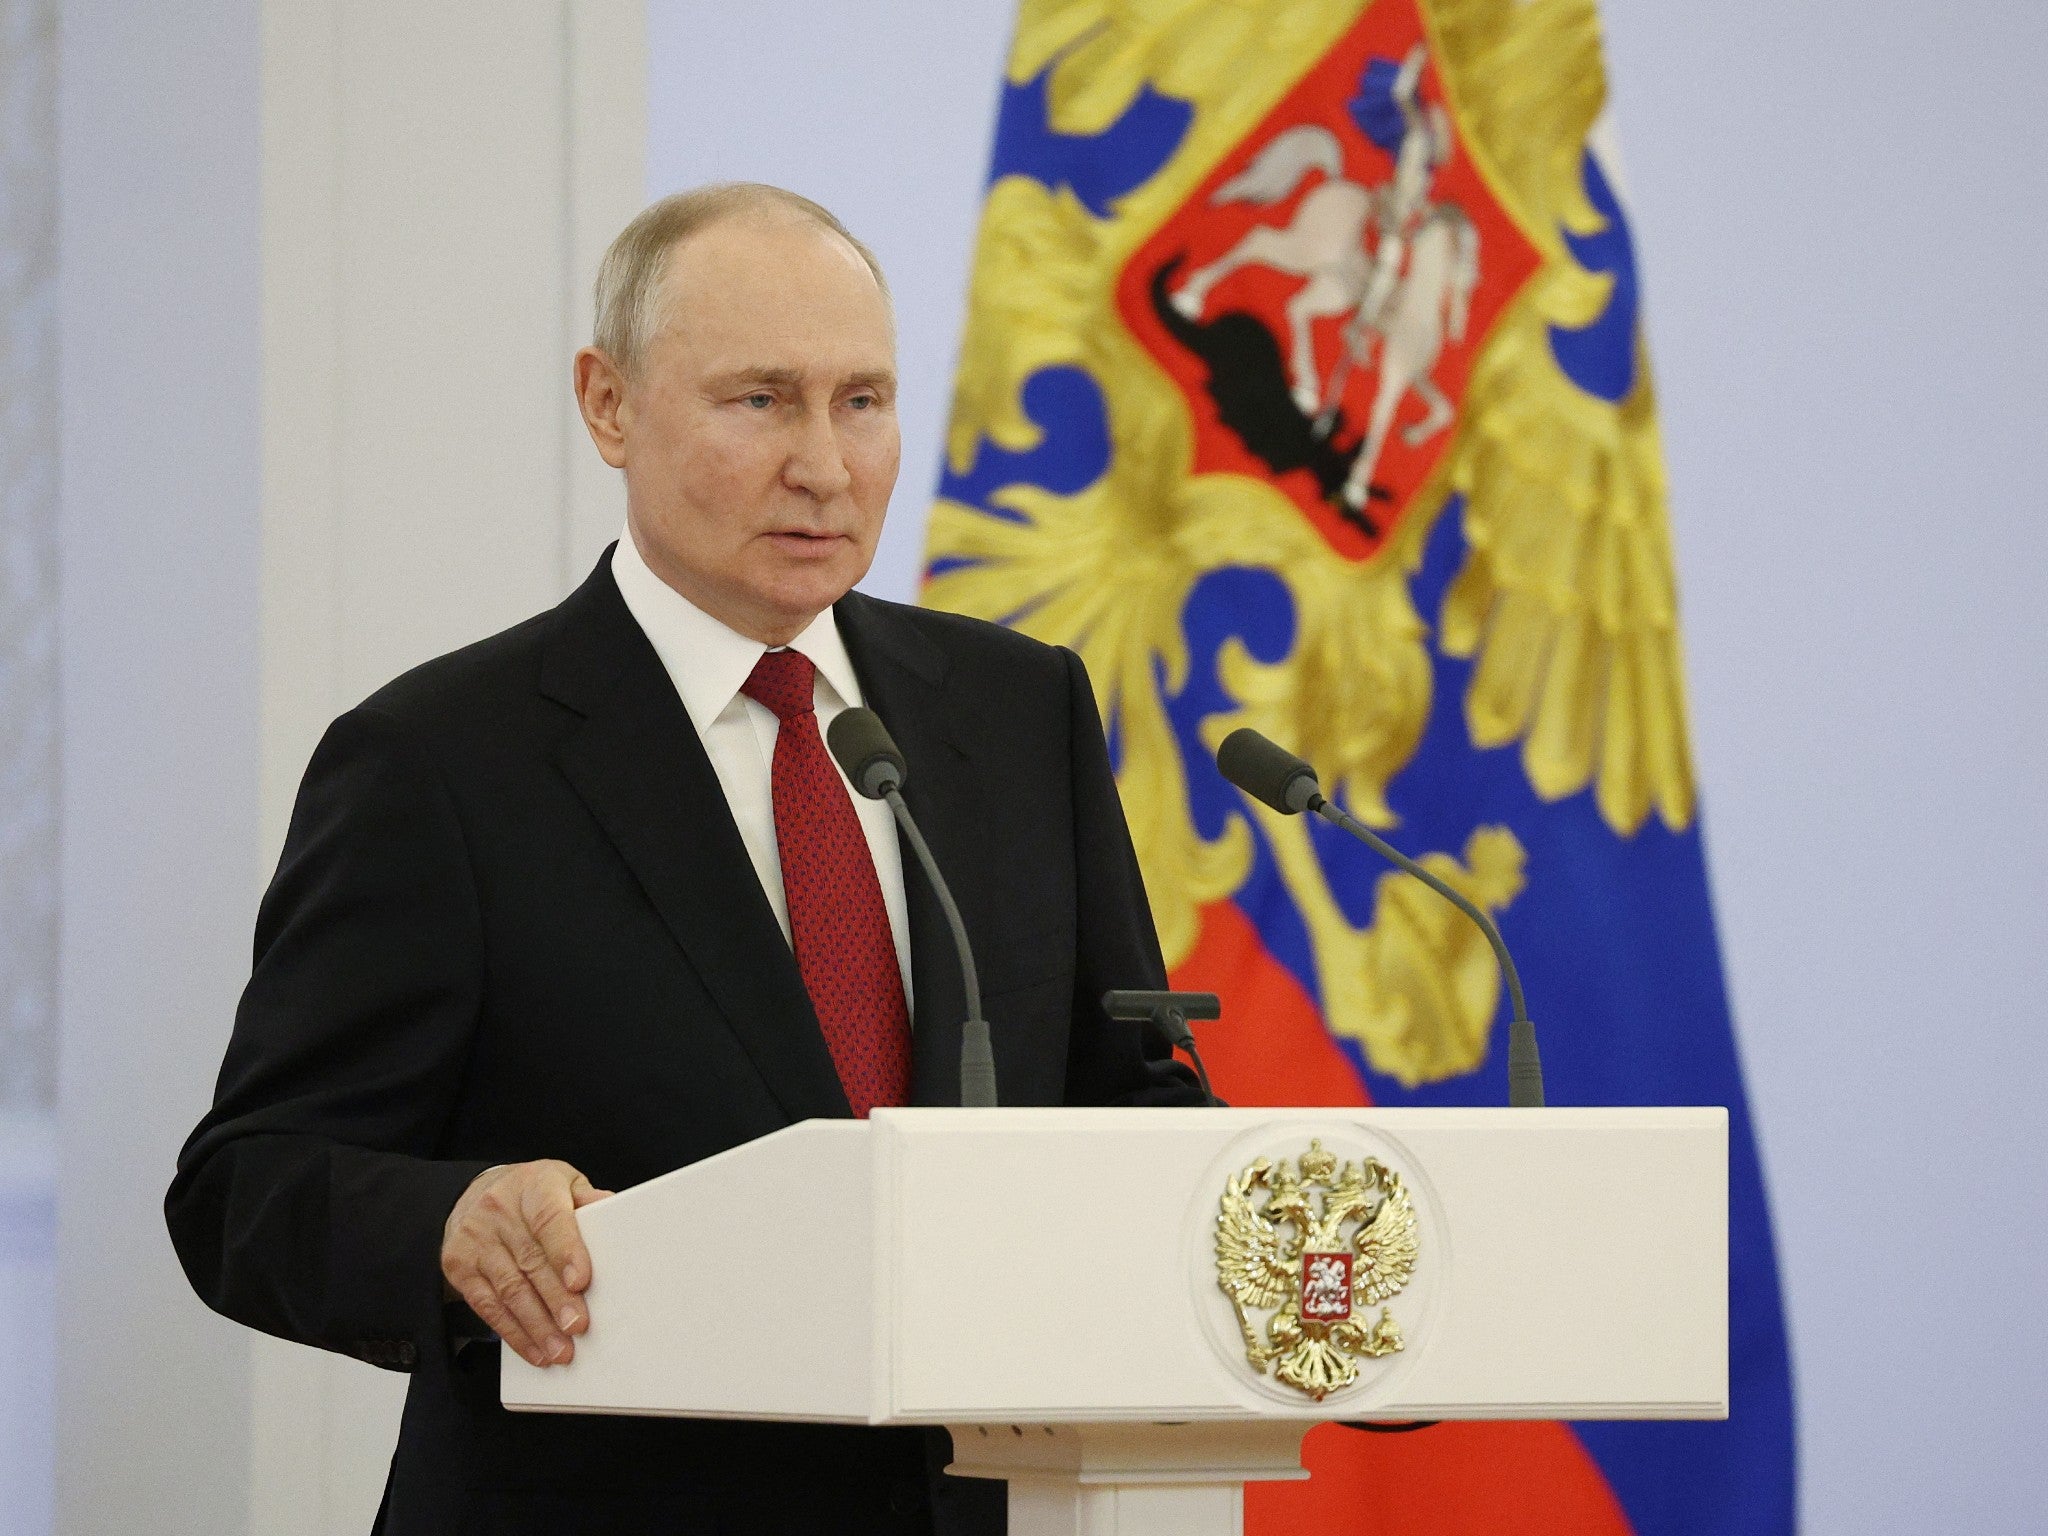 Vladimir Putin has been talking up Russia’s nuclear arsenal, present and future